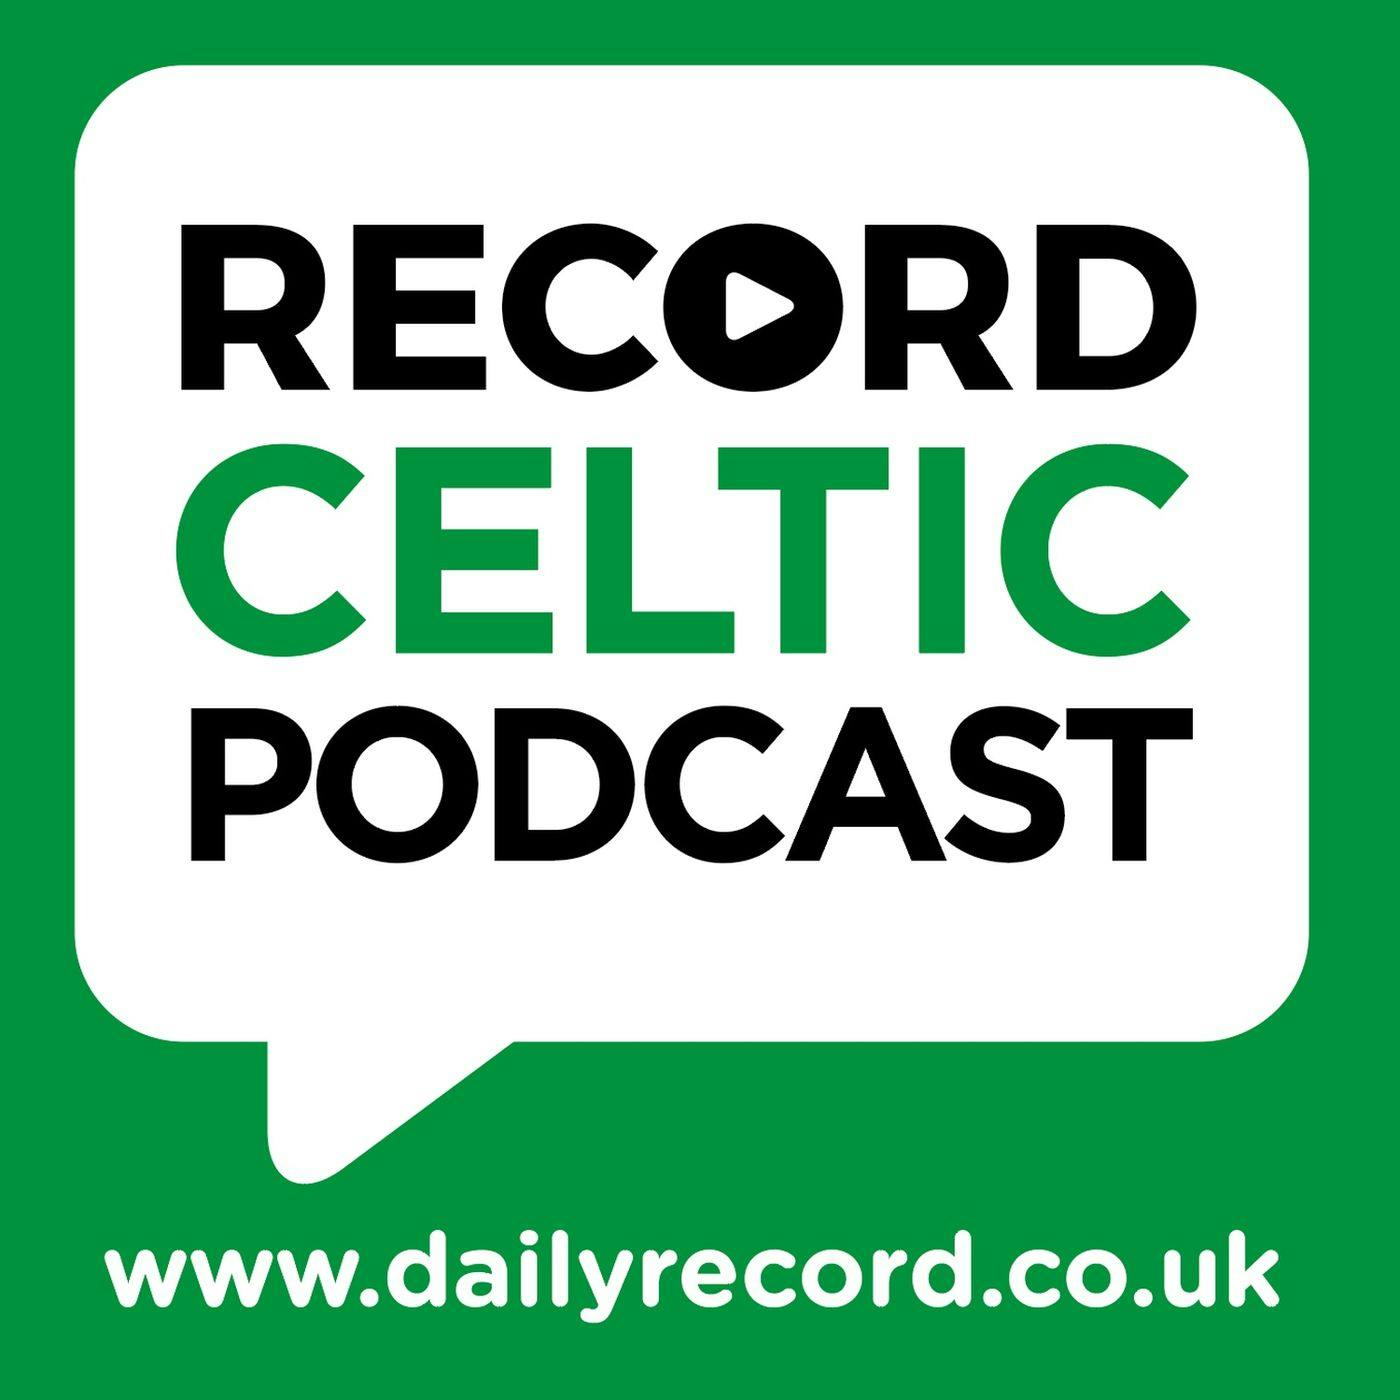 Celtic’s derby performance can’t be defended | Lawwell will scrutinise at some point | Next six games massive for Lennon